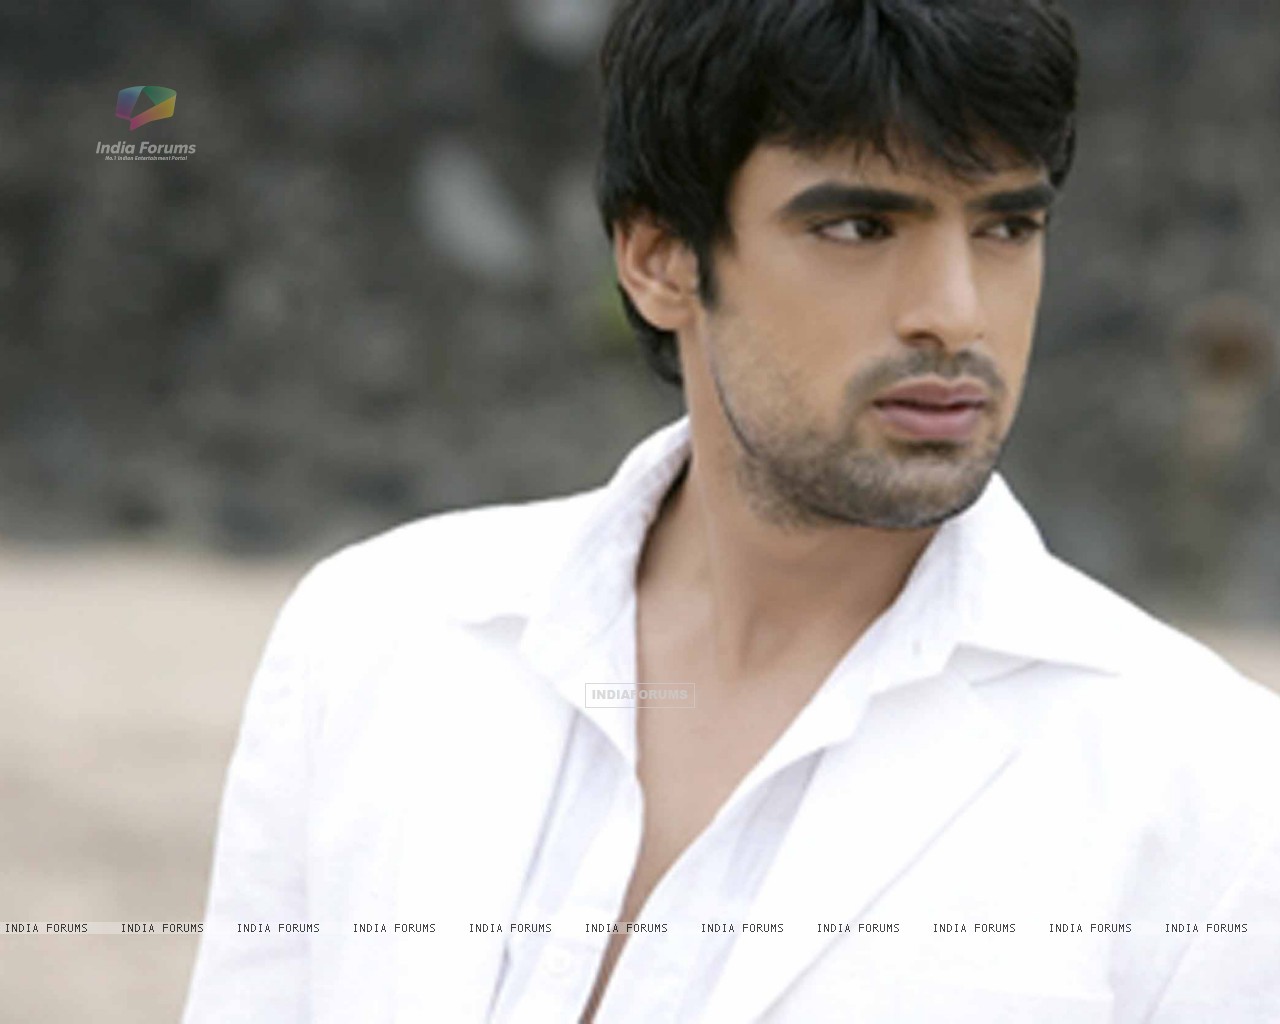 Download links of Mohit Malik wallpaper images with the image title as &quot;Mohit Malik&quot; : Mohit Malik 1366x768 | Mohit Malik 800x600 | Mohit Malik 1024x768 ... - 31802-mohit-malik